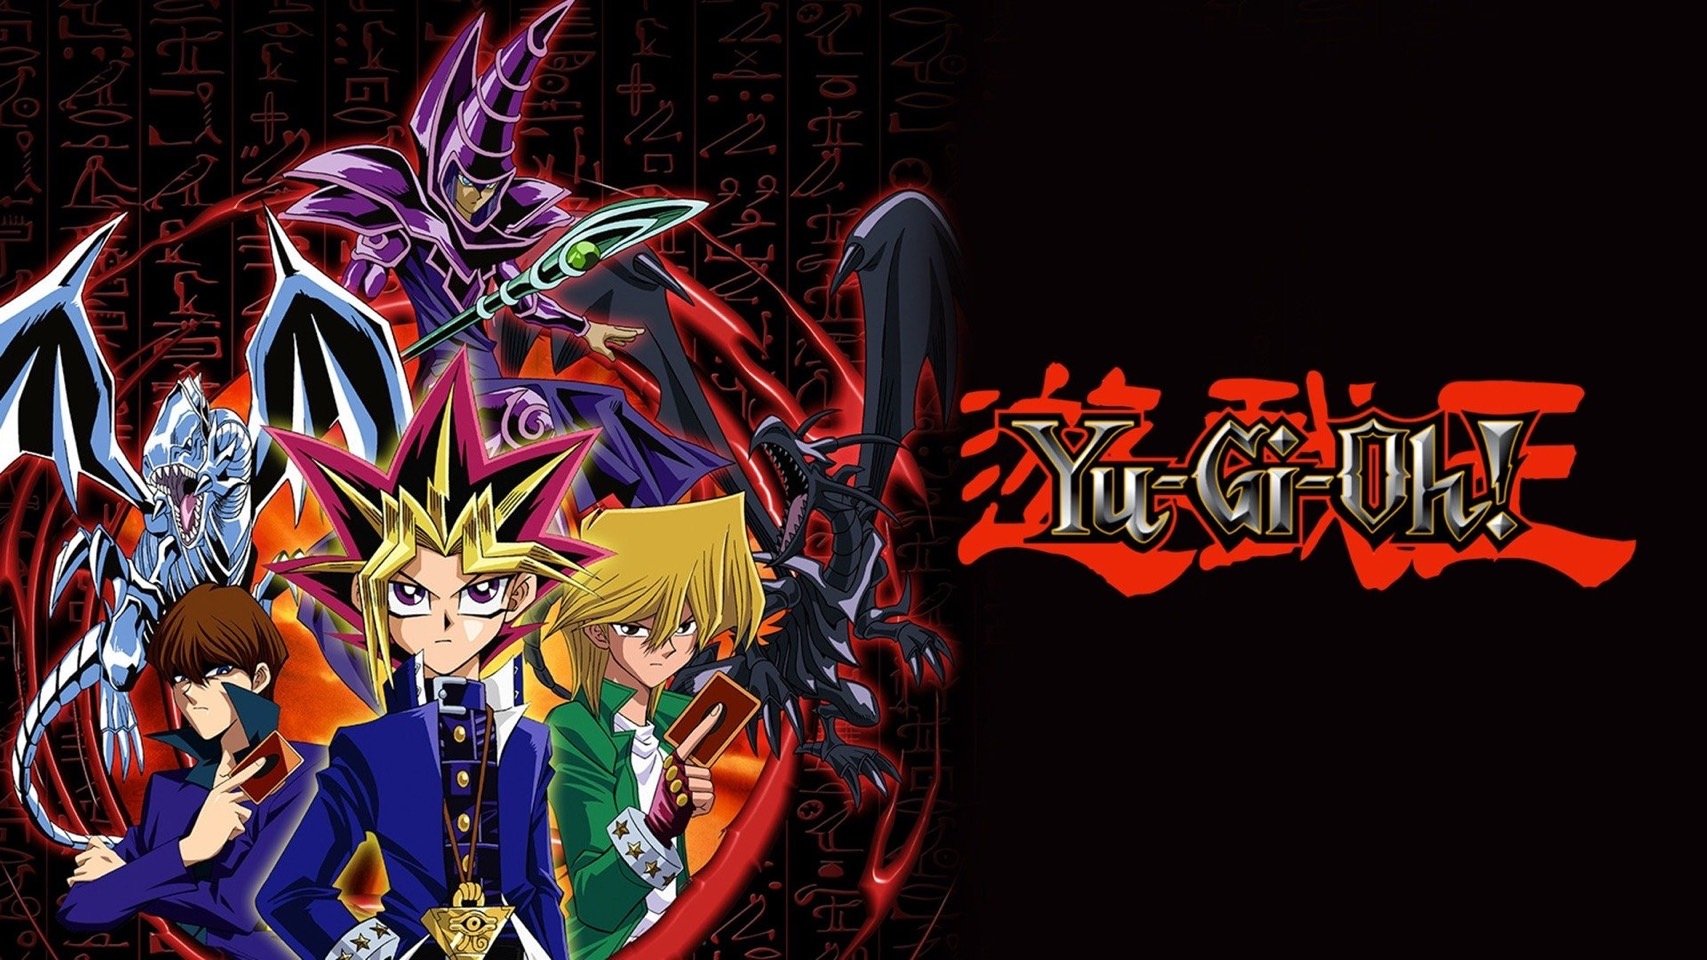  Let's get to know Yu-Gi-Oh! Trading Card Game.